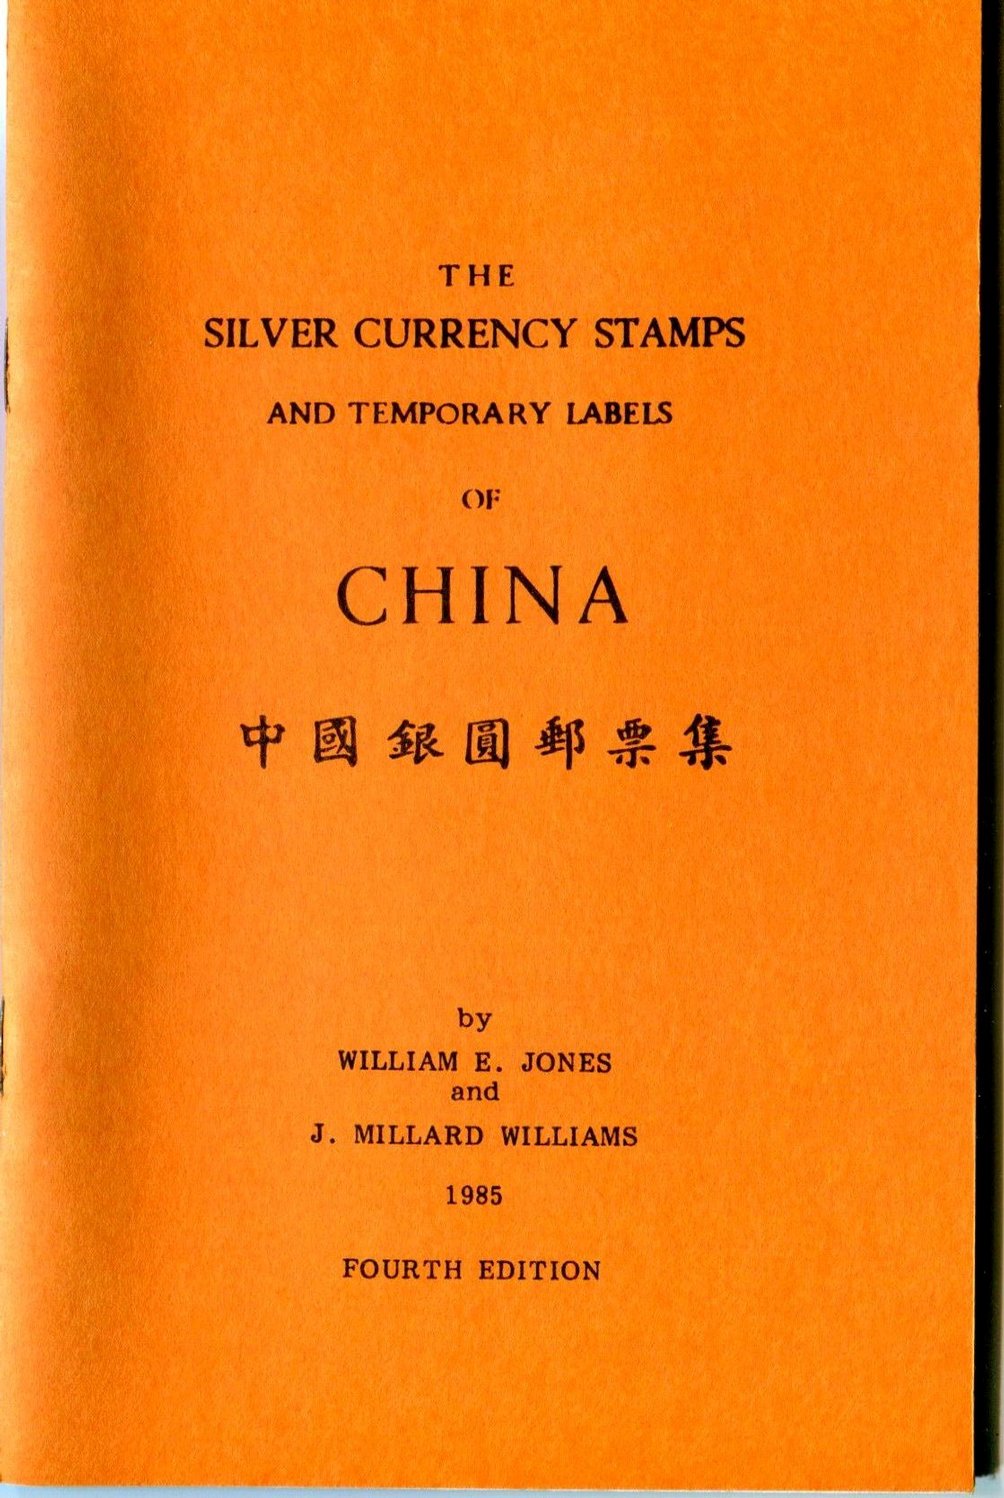 J. Millard Williams, The Silver Currency Stamps and Temporary Labels of China, 4th Ed., 52 pages, 1985, new condition, paperback, the last and best of his books on the Silver Yuan (5 oz.)